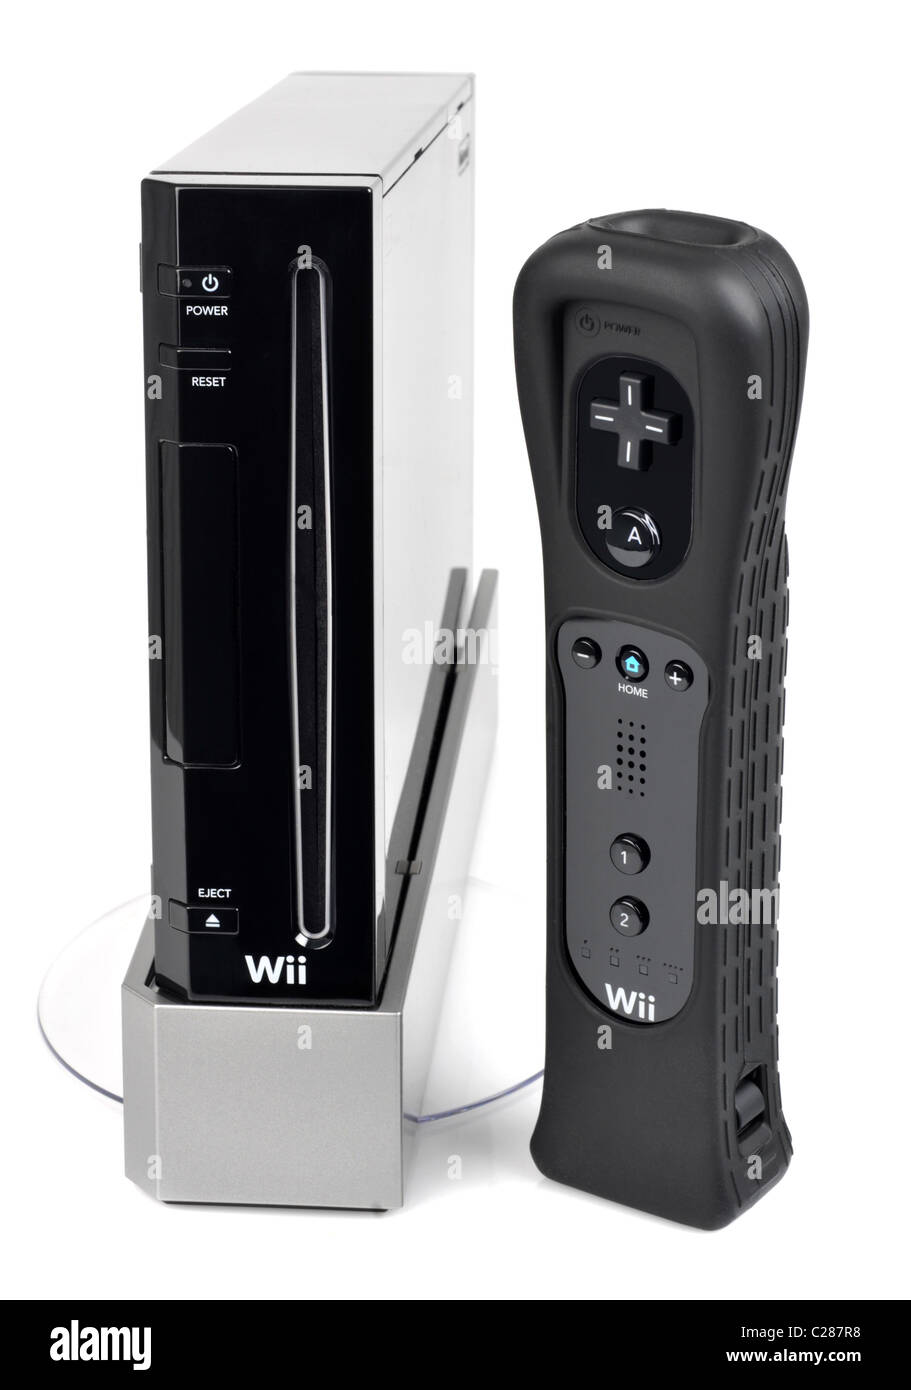 Wii games console and controller, Nintendo Wii games console Stock Photo